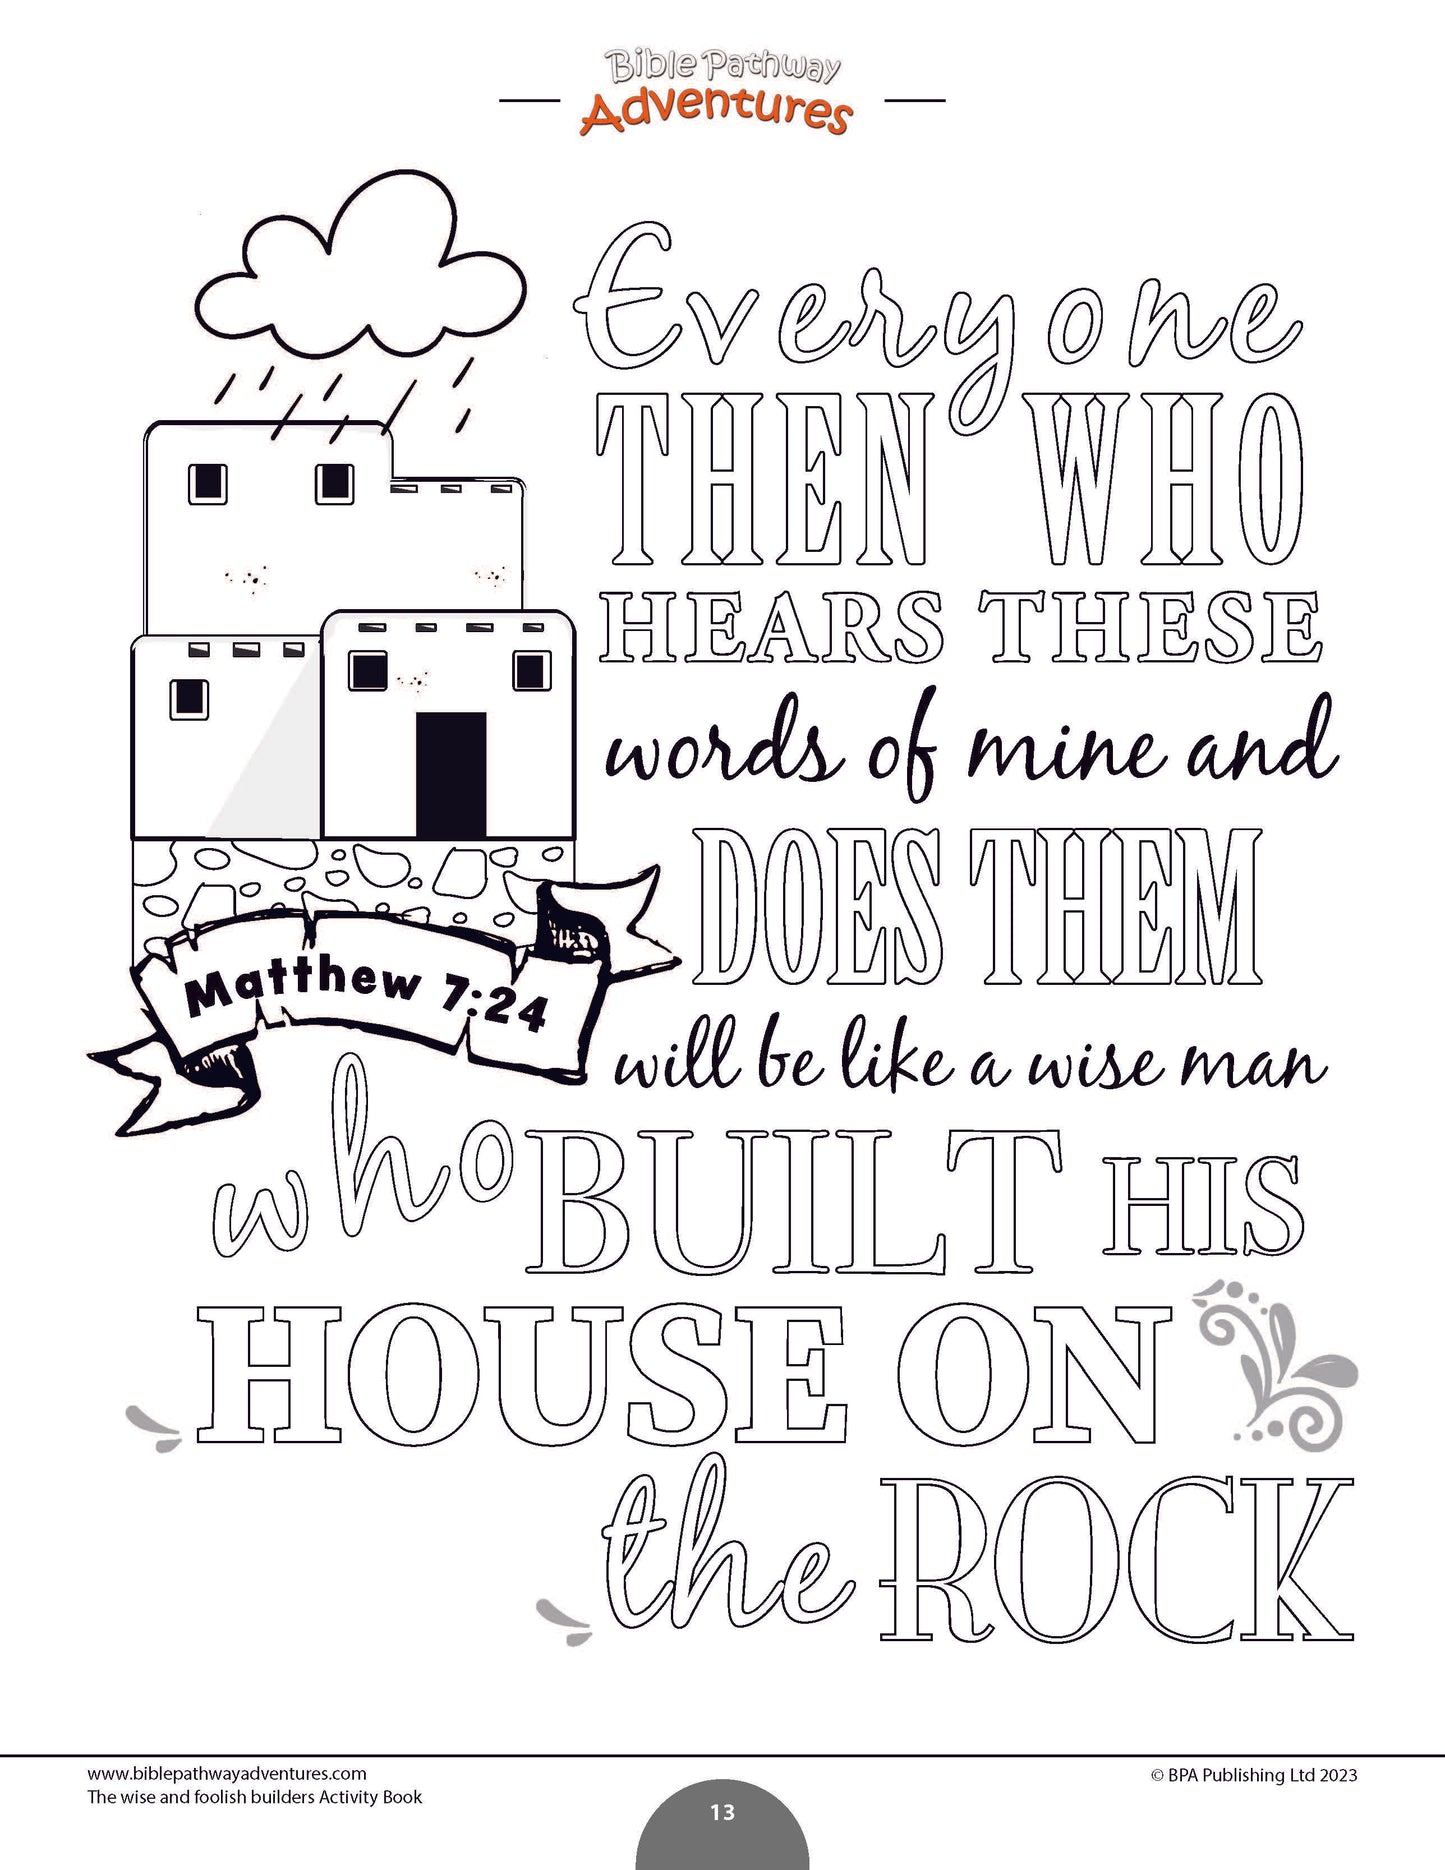 Parable of the Wise and Foolish Builders Activity Book (PDF)